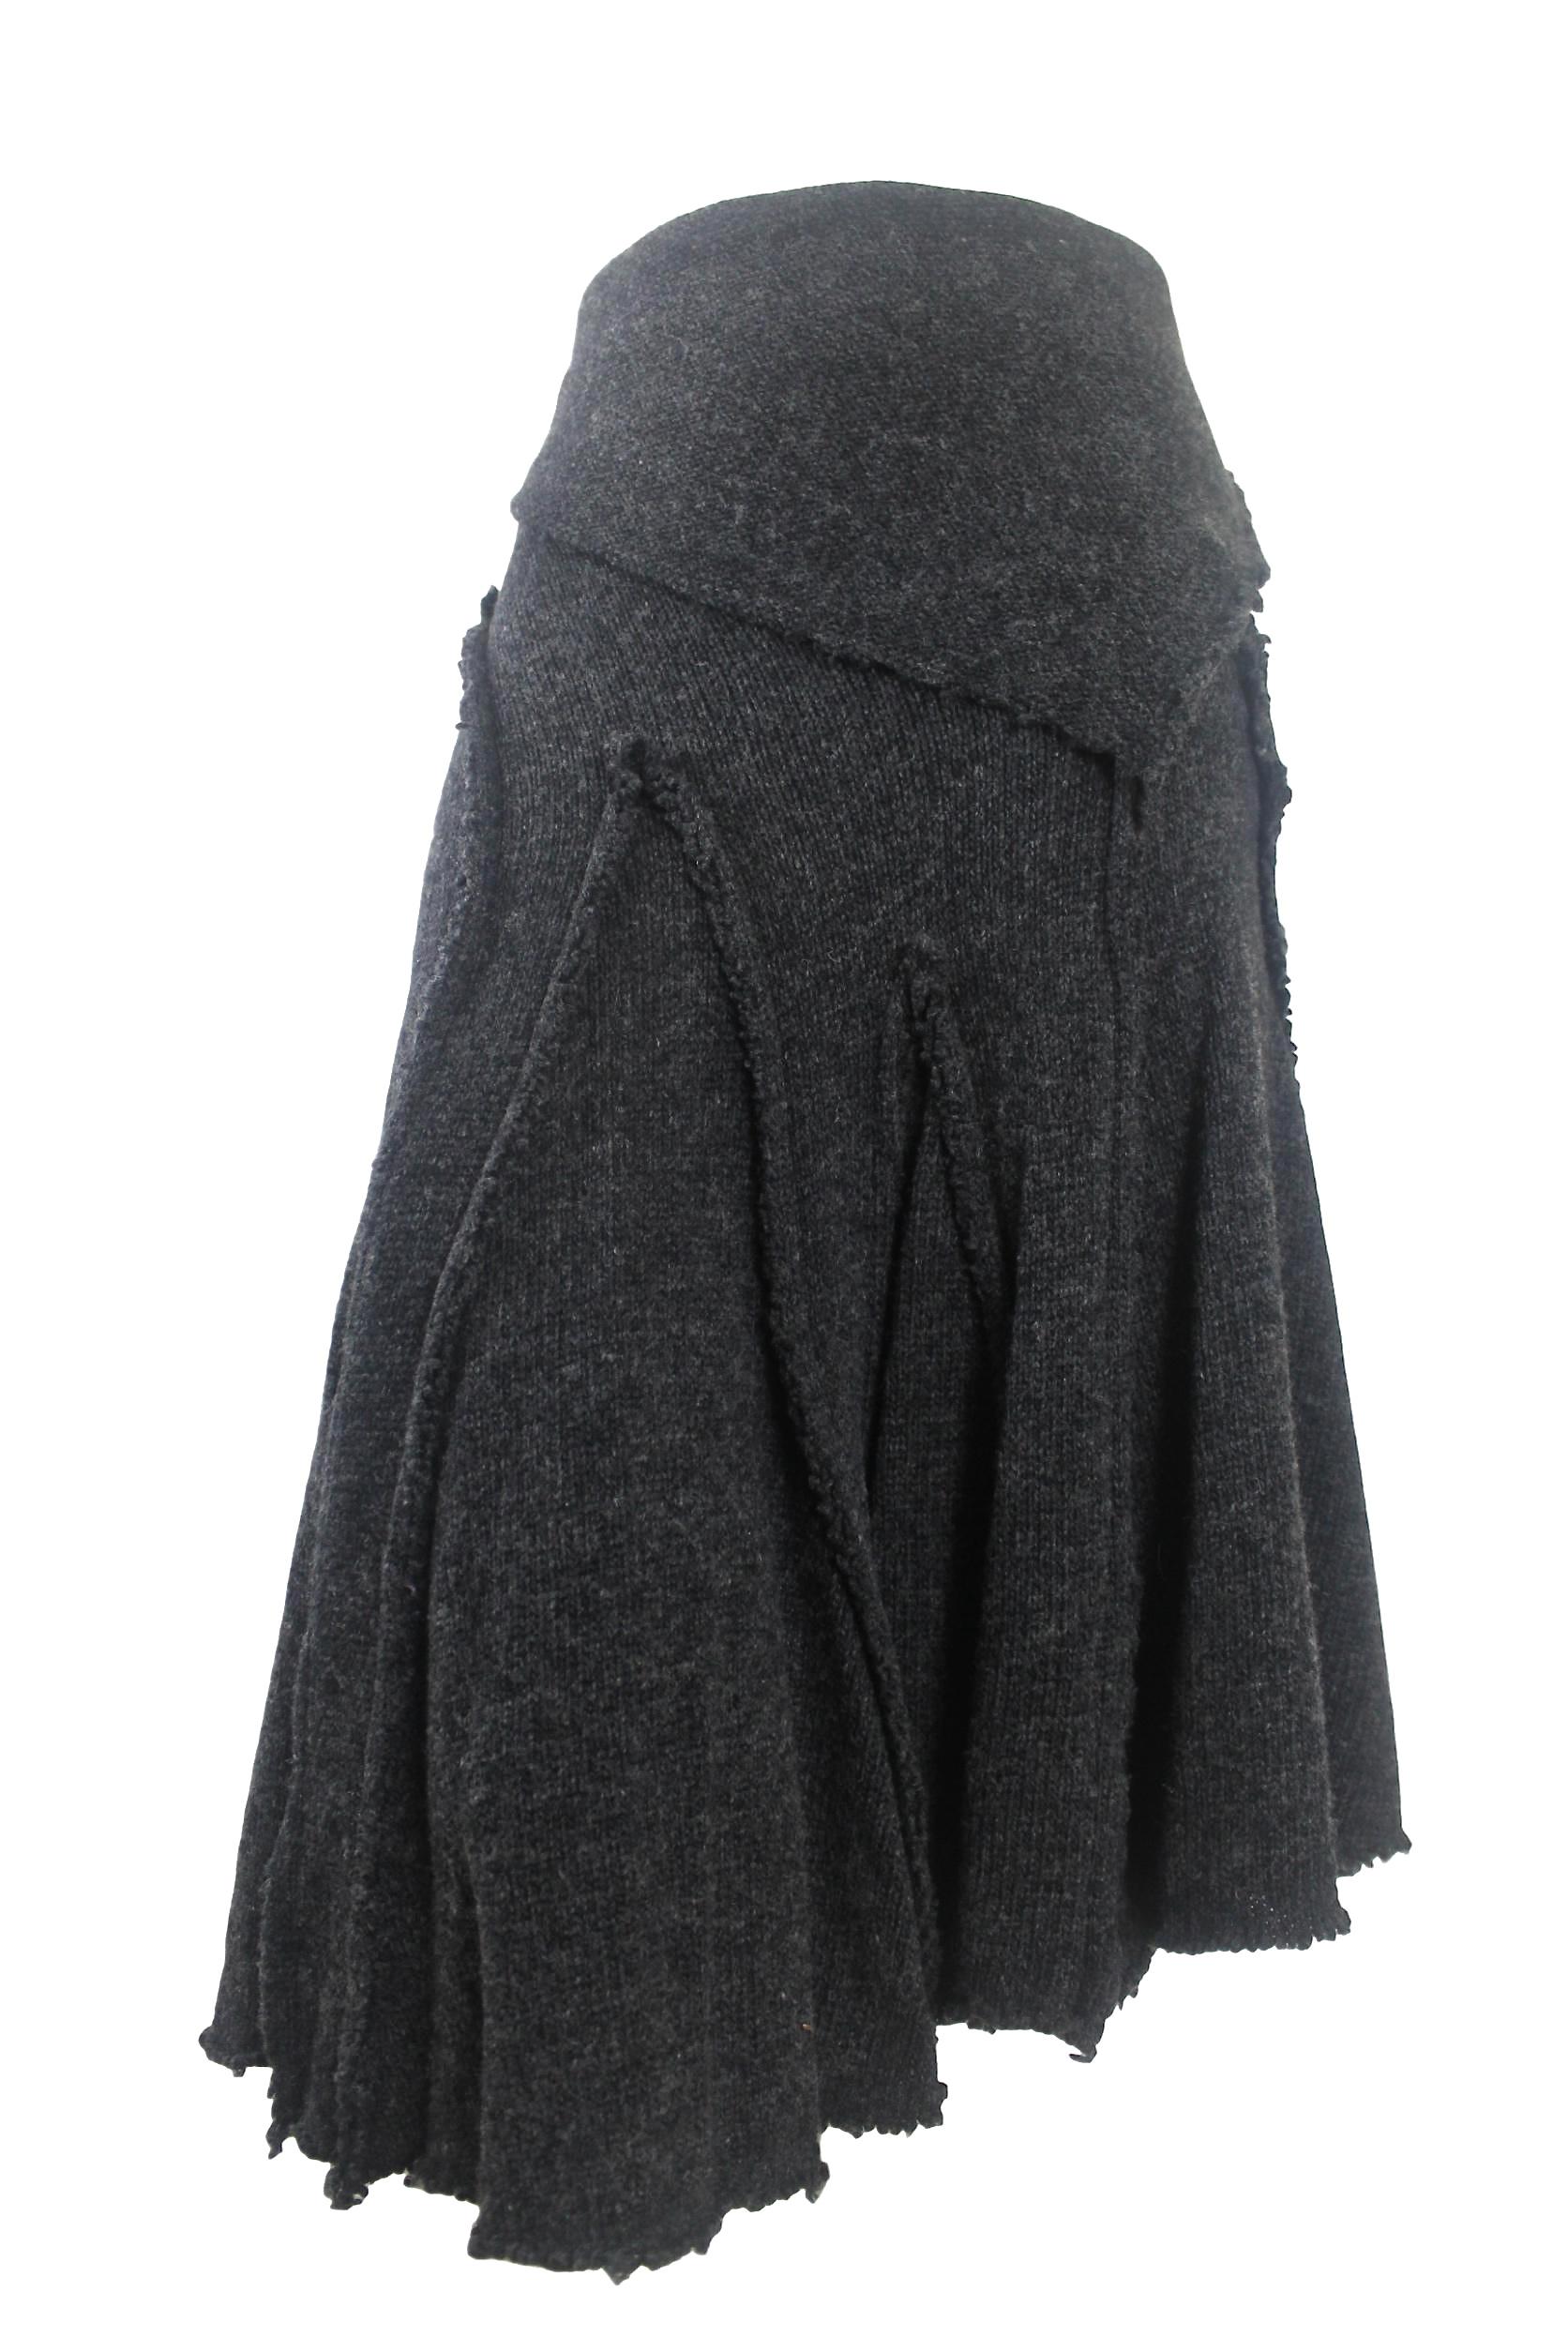 Comme des Garcons 2002 Collection 
Wool Knit Skirt